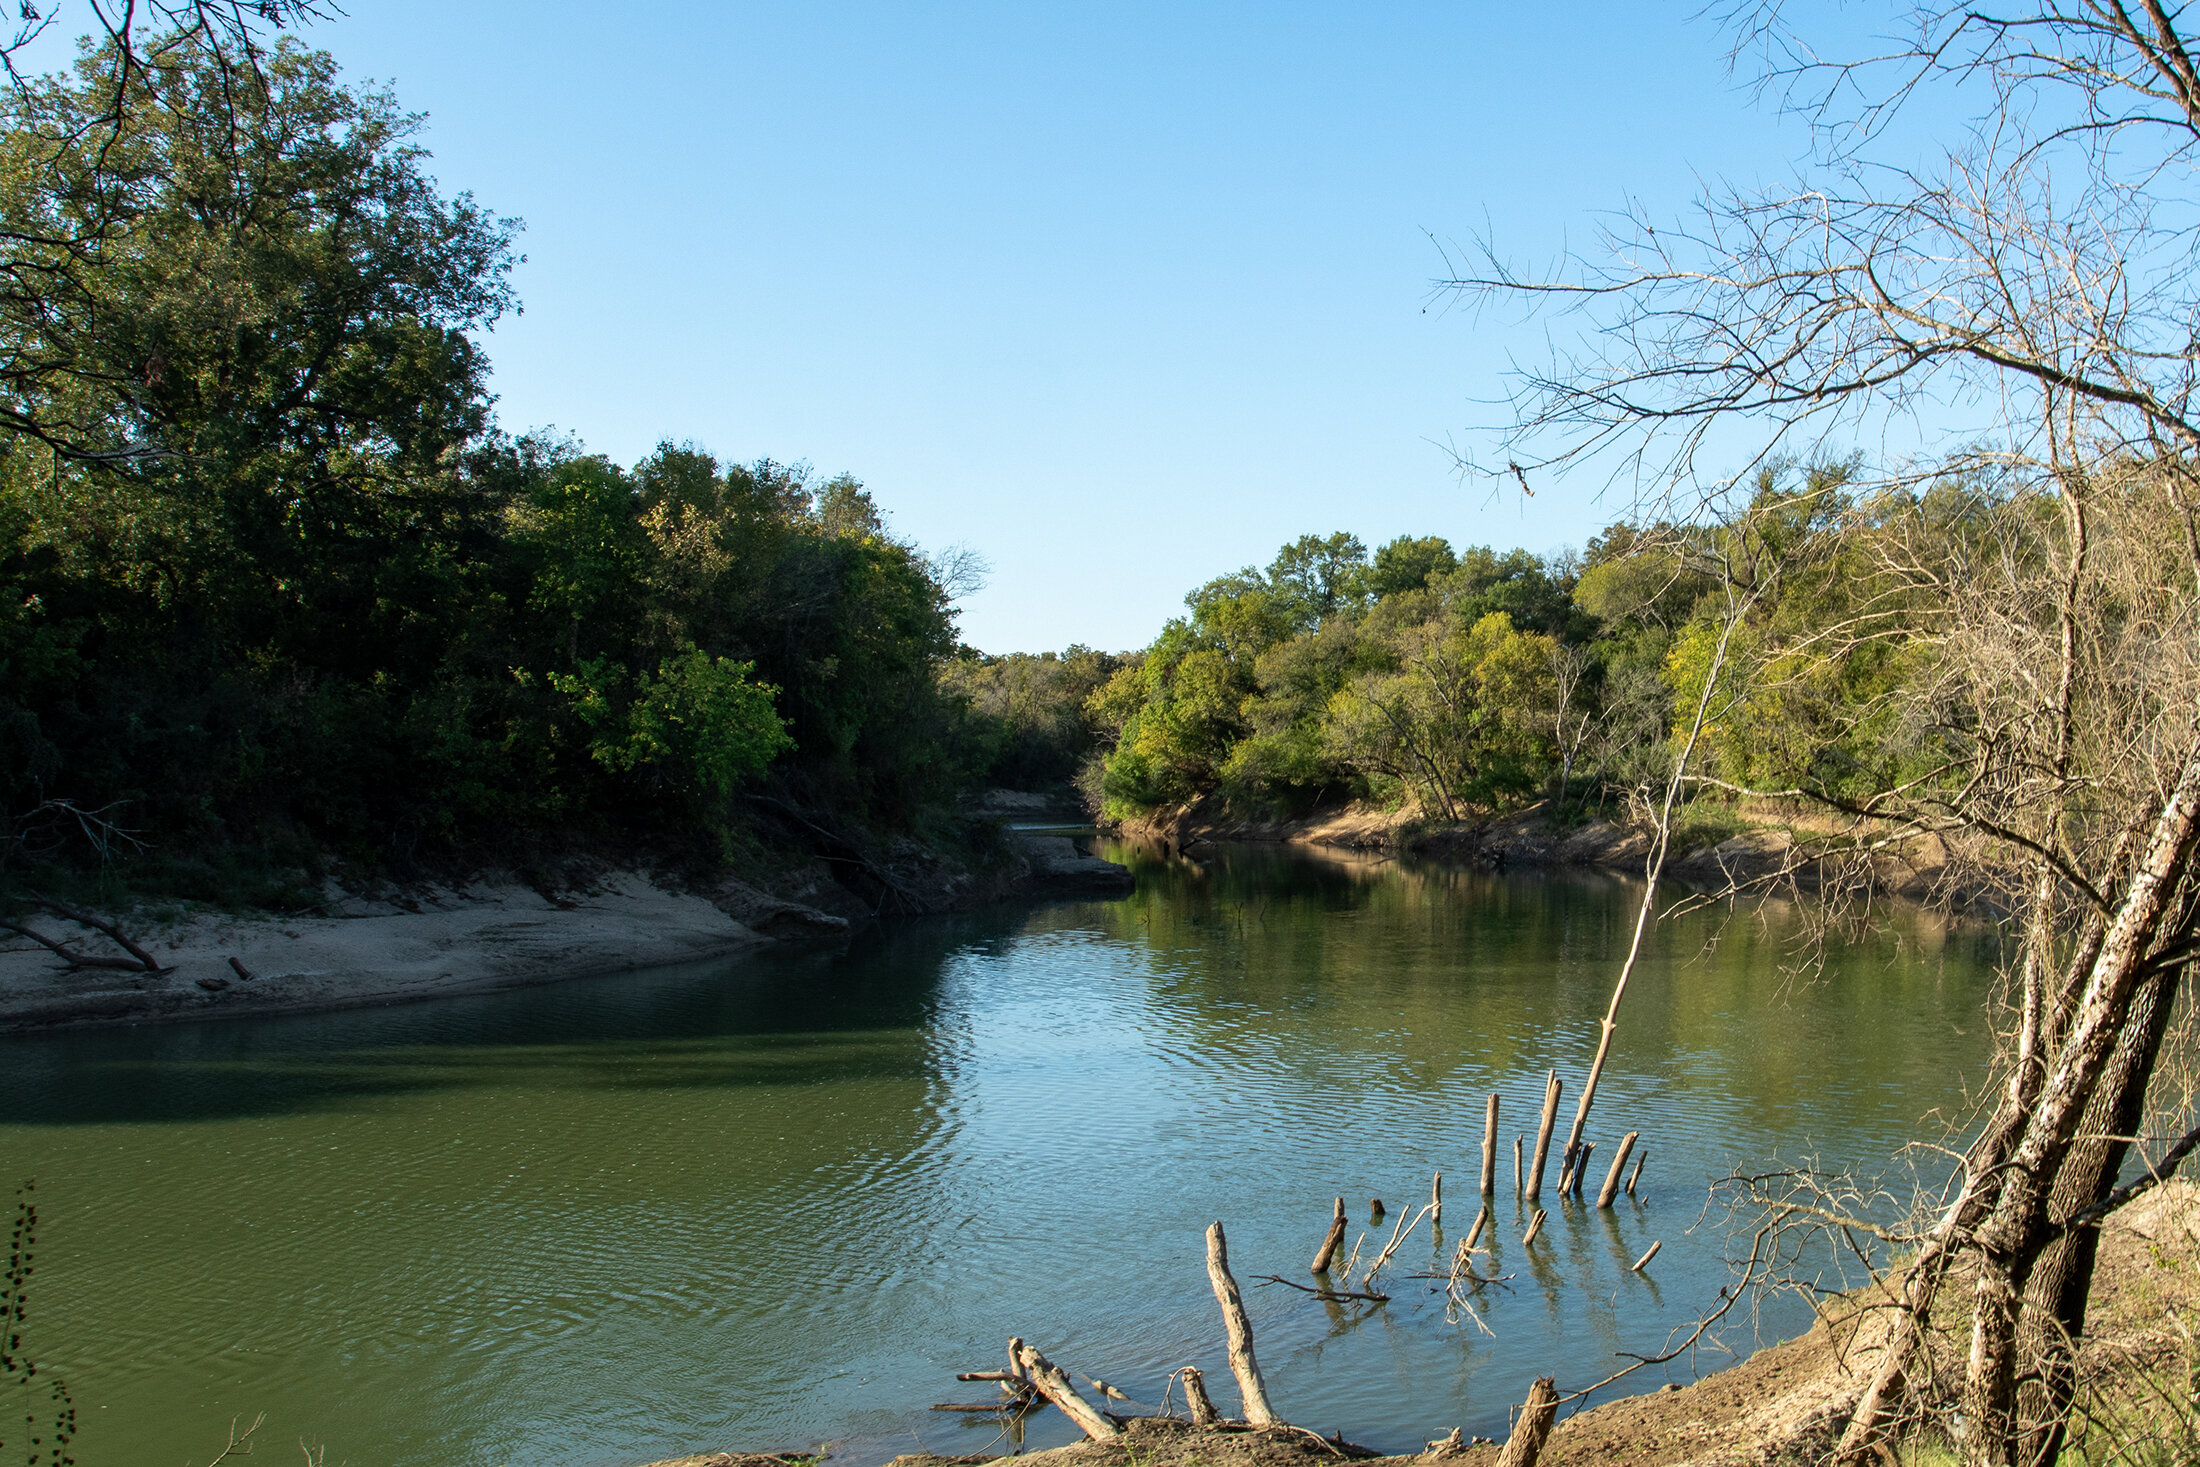 The banks of the Trinity River.